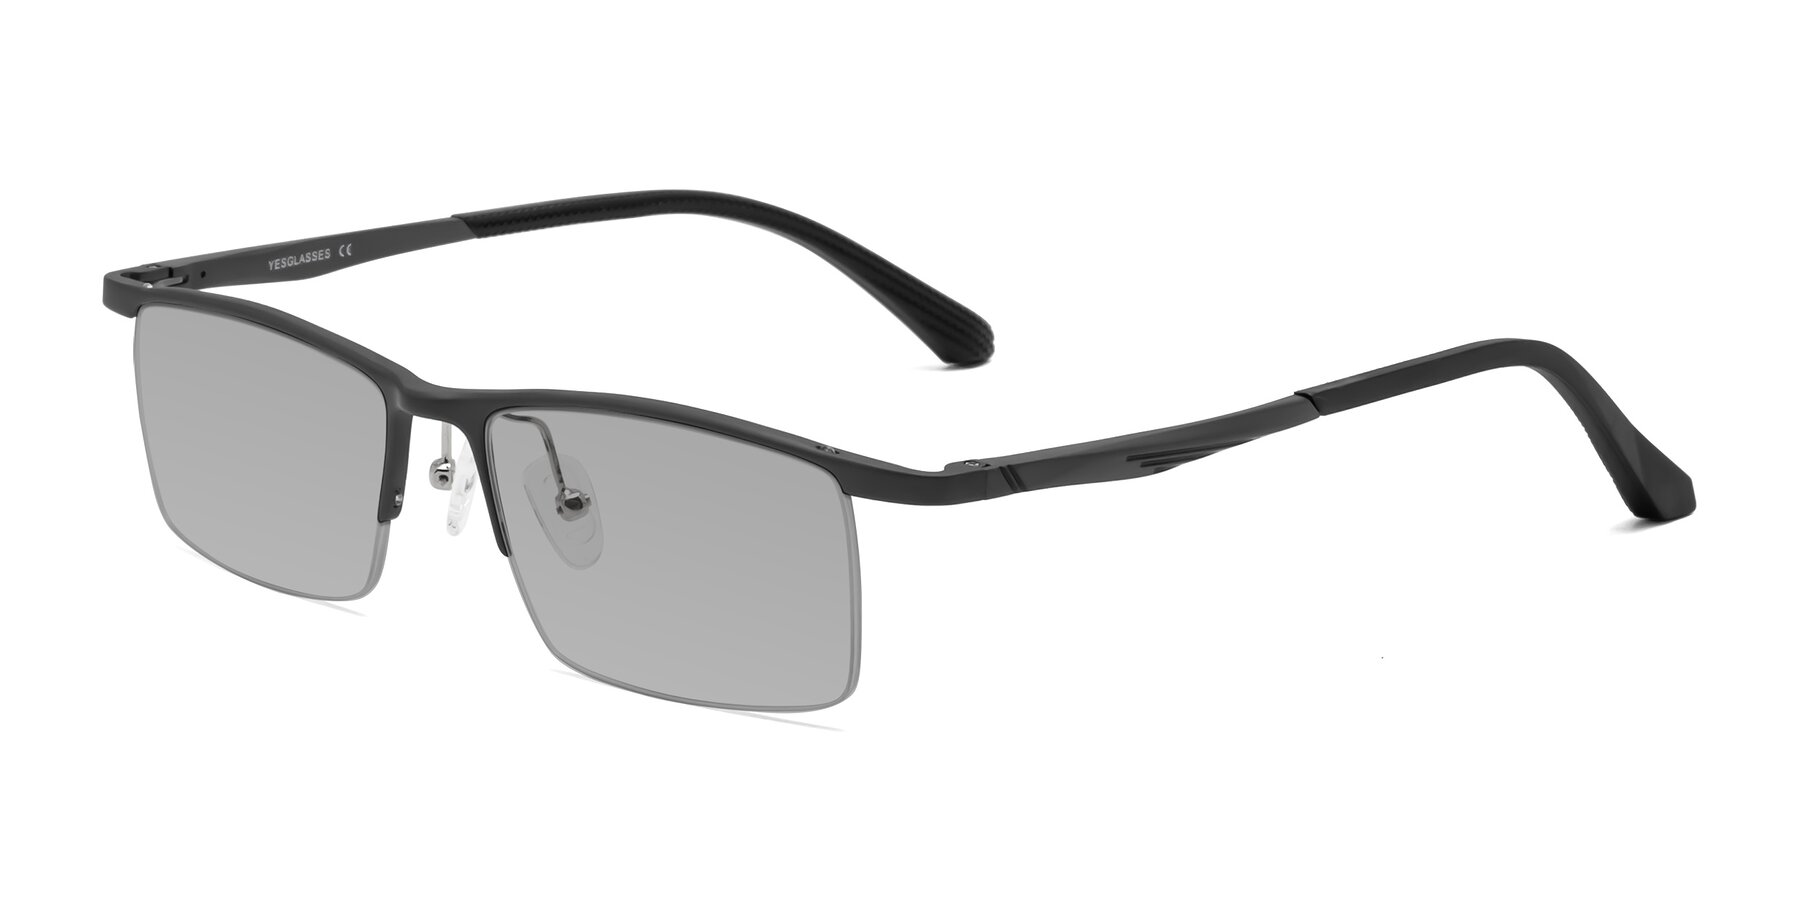 Angle of CX6236 in Gunmetal with Light Gray Tinted Lenses